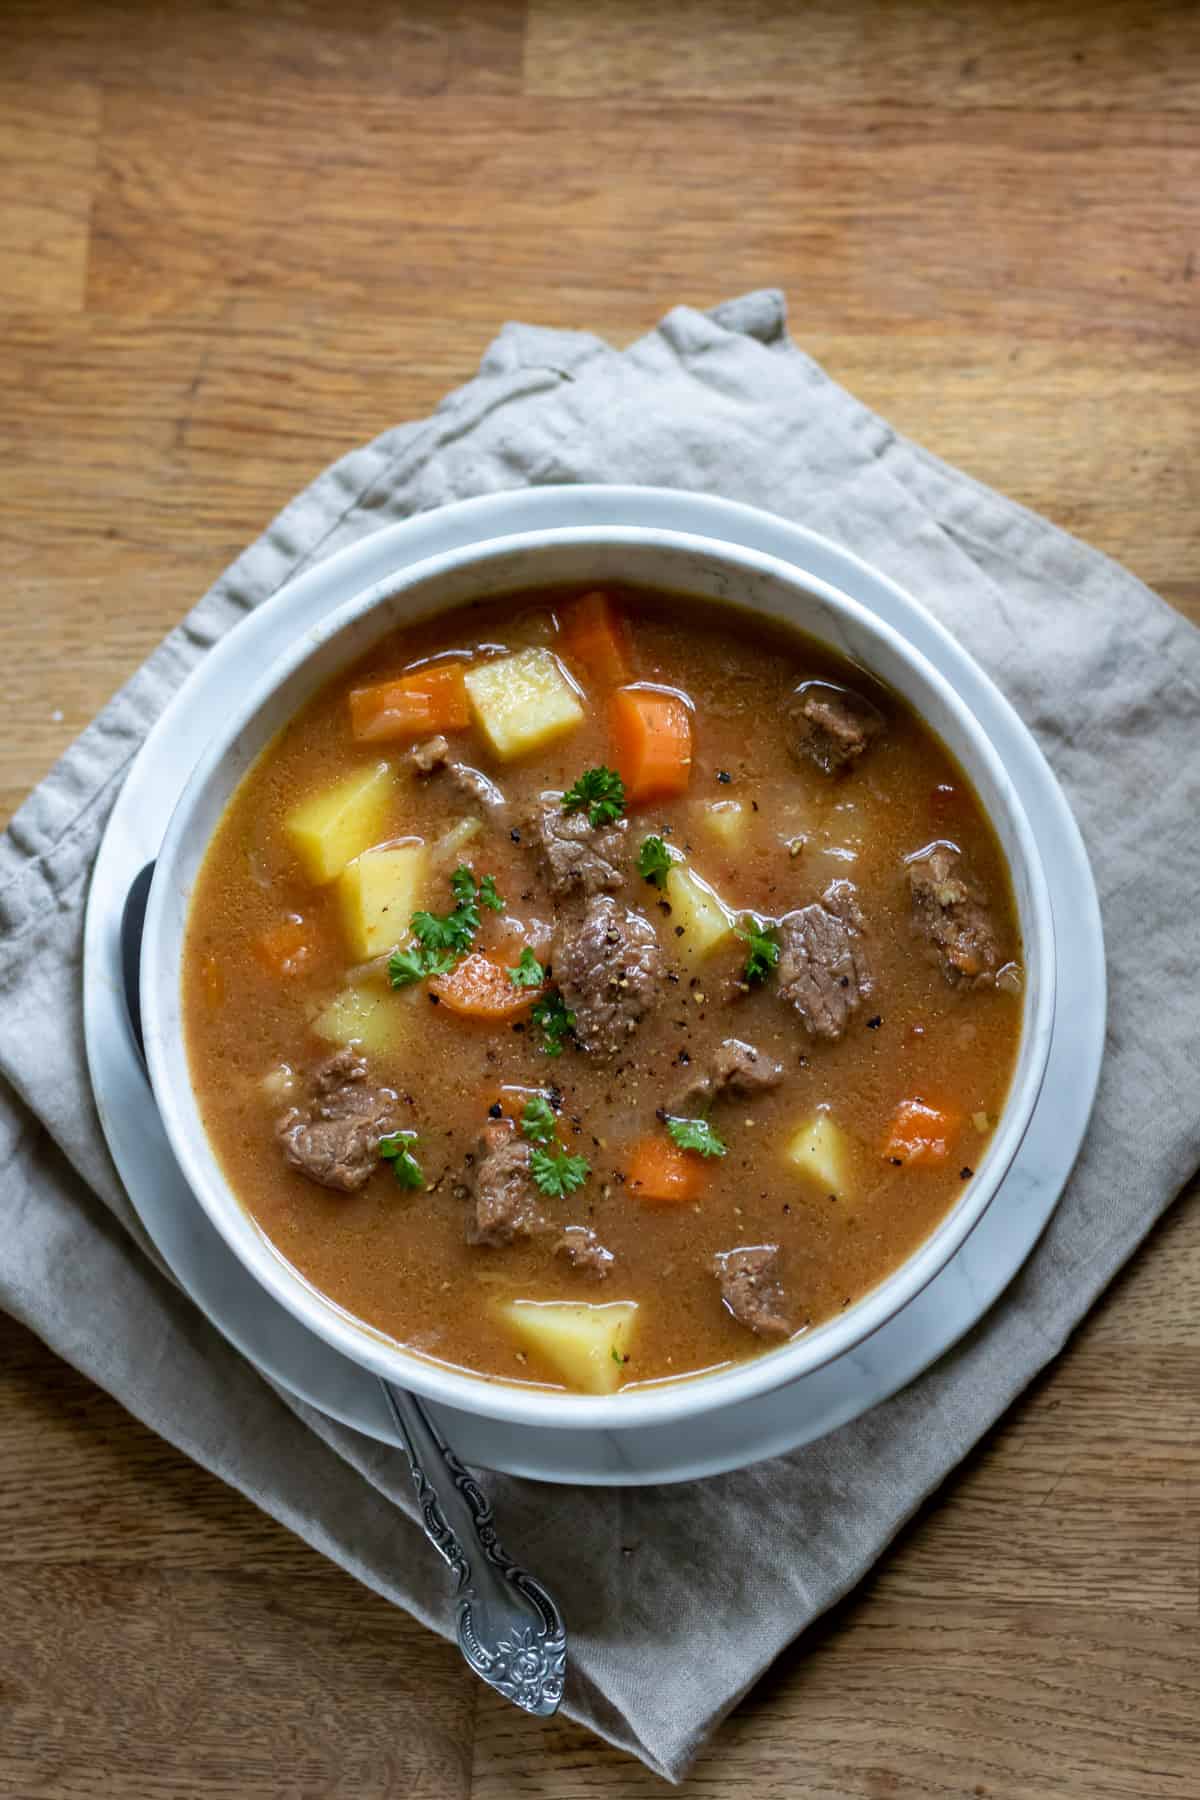 Table with a bowl of Irish beef stew.